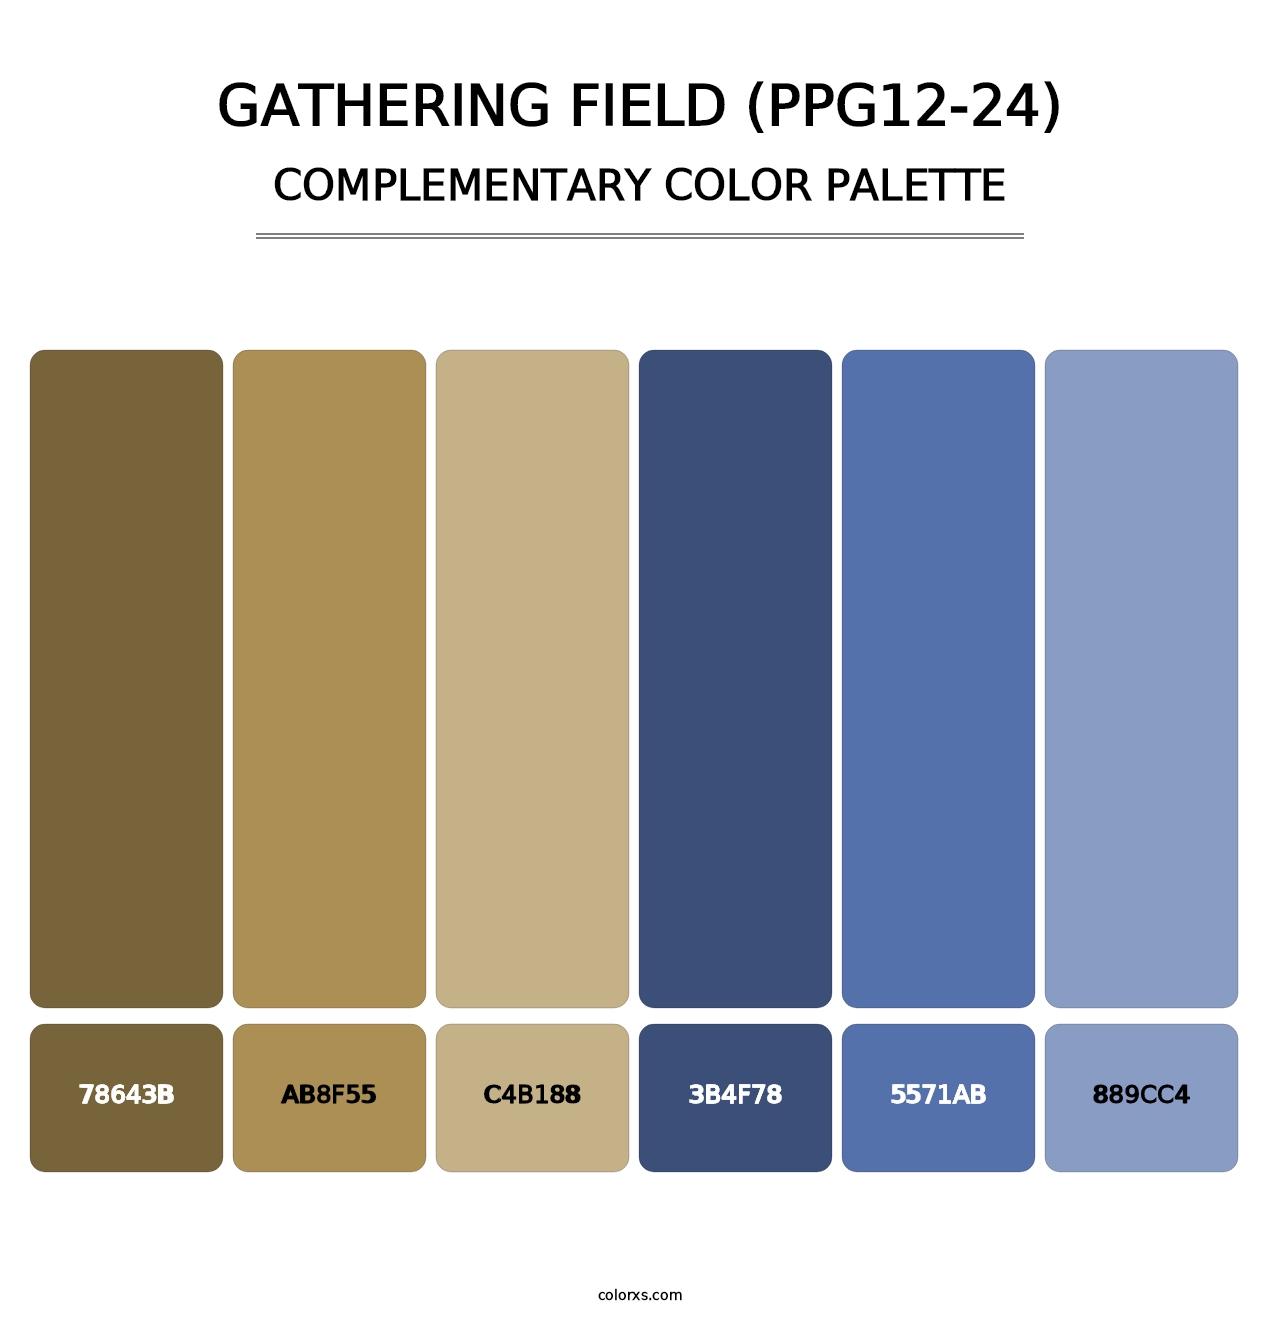 Gathering Field (PPG12-24) - Complementary Color Palette